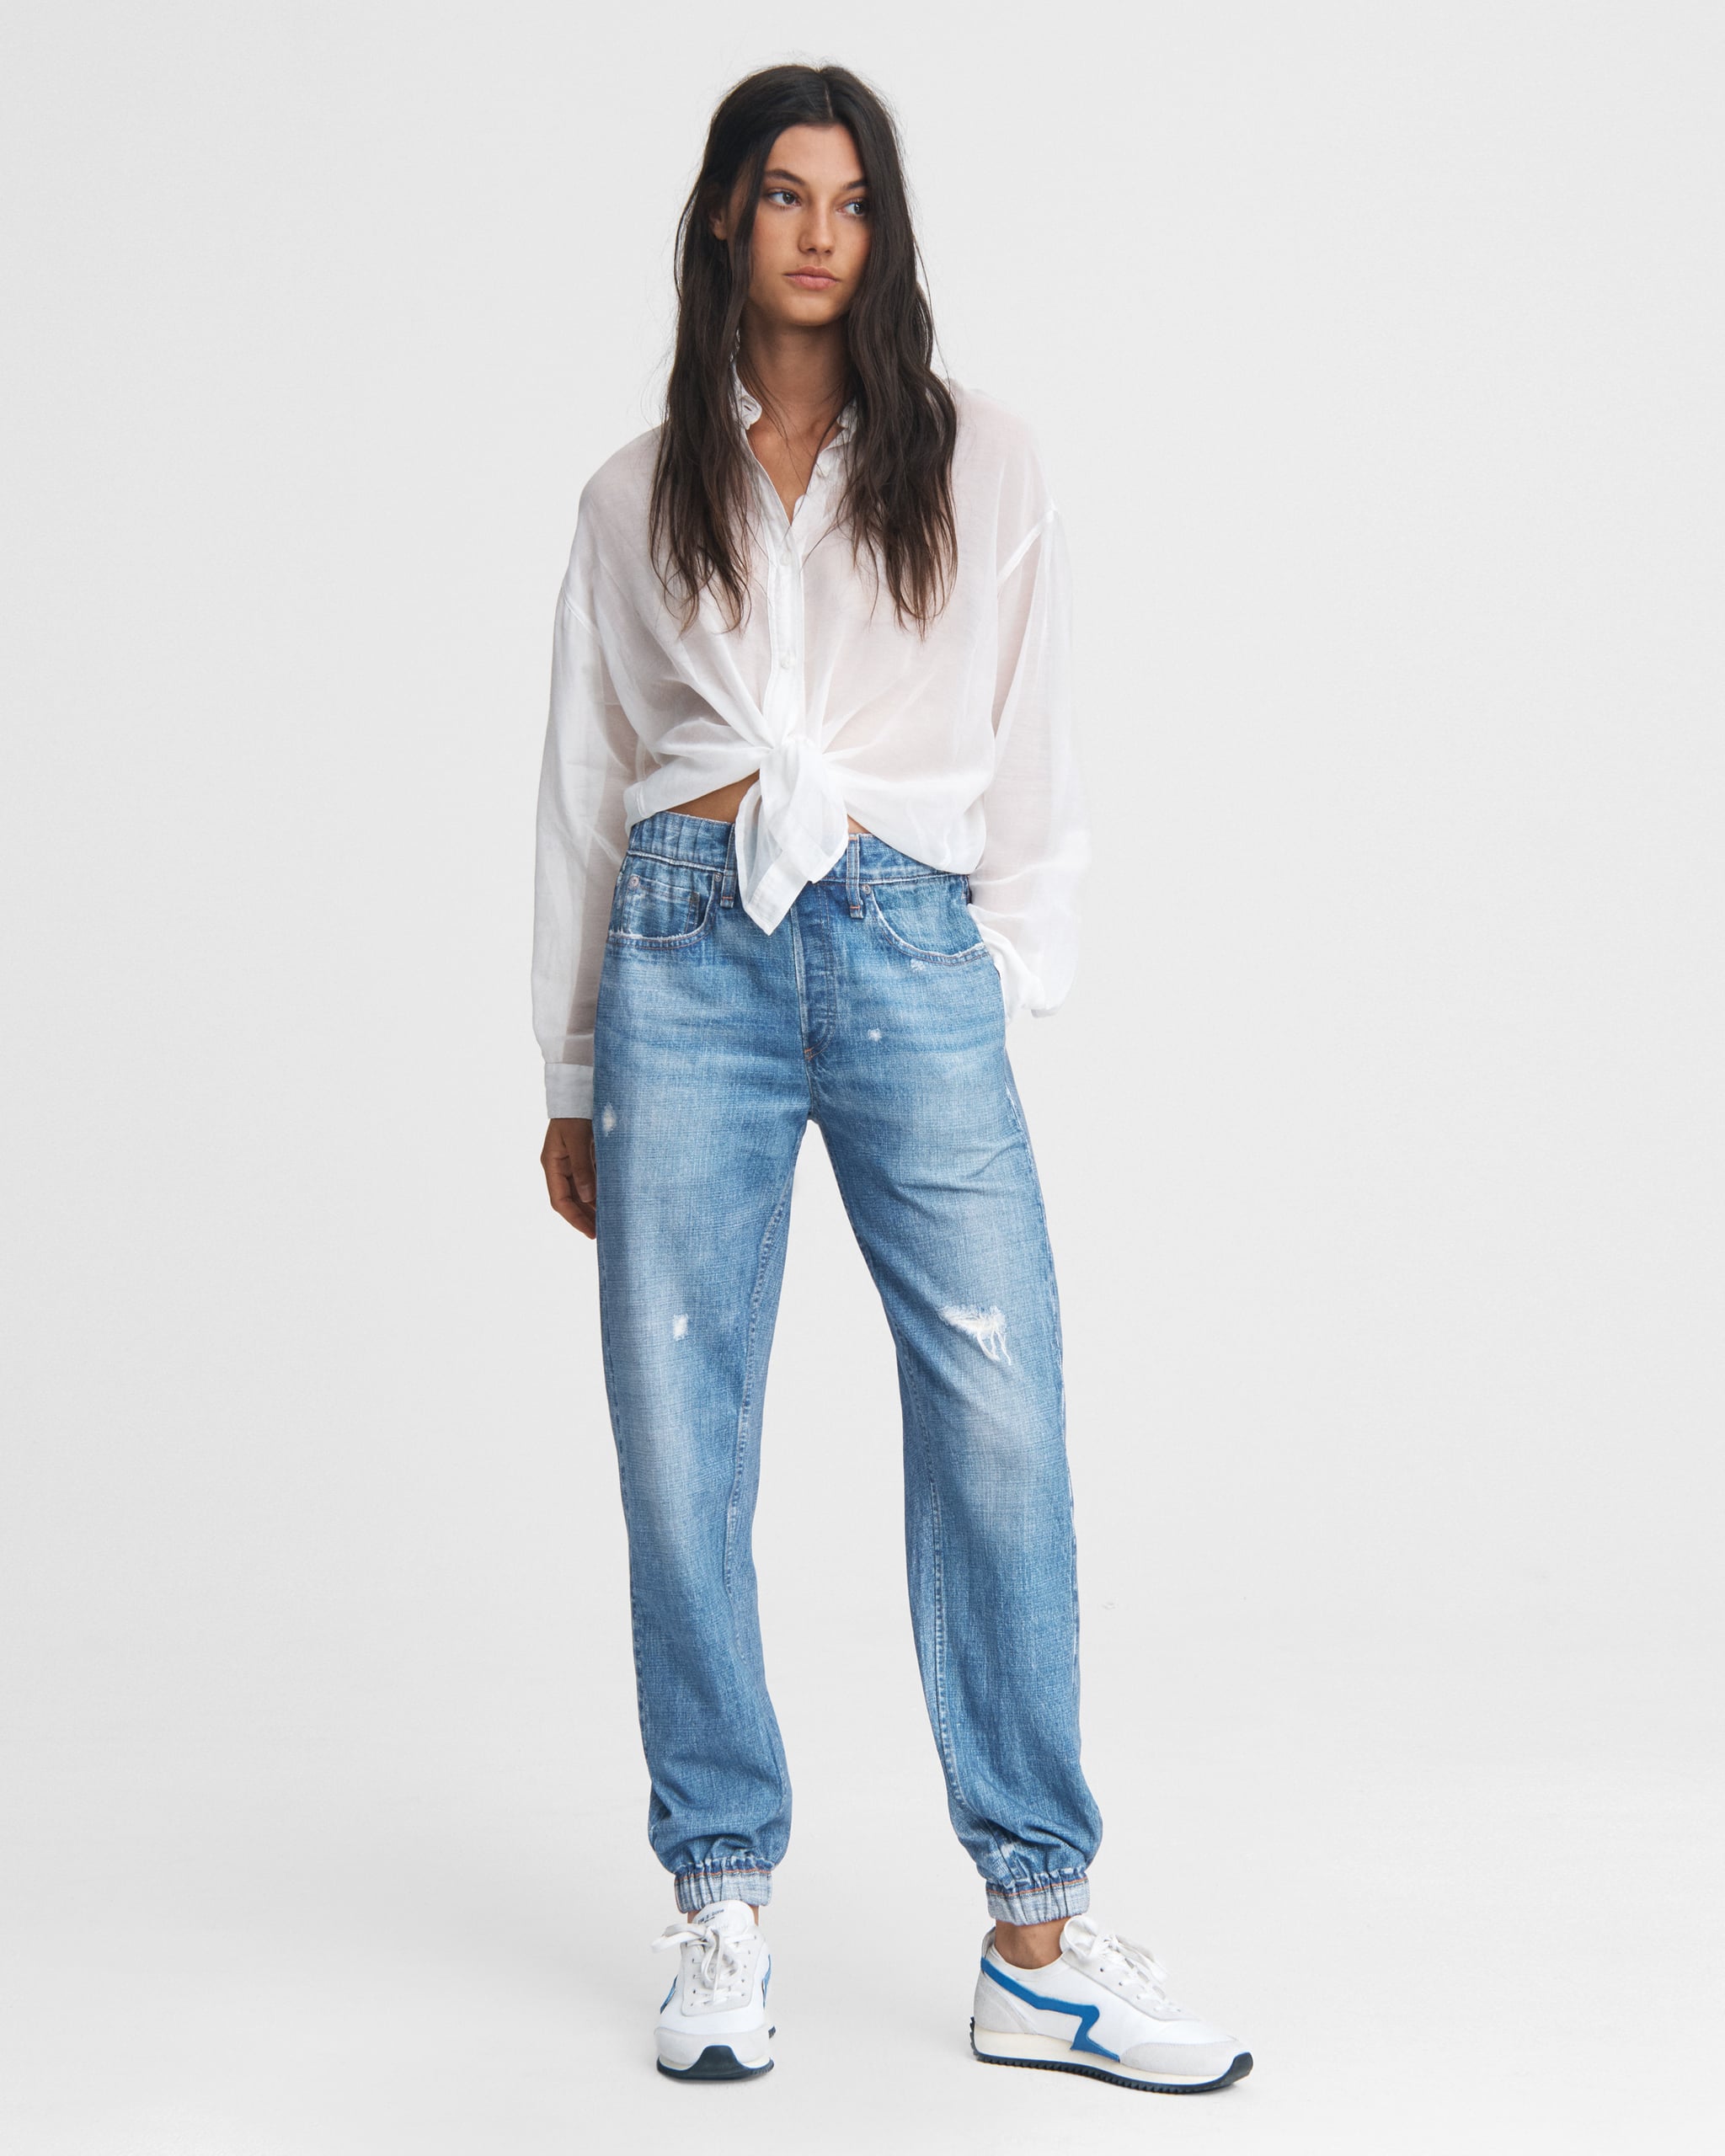 Har lært Synes Hoved Fall 2020 Denim Trend: Sweatpant Jeans | These Are Fall's Biggest Denim  Trends, and Yes, You Can Wear Them at Home | POPSUGAR Fashion Photo 18